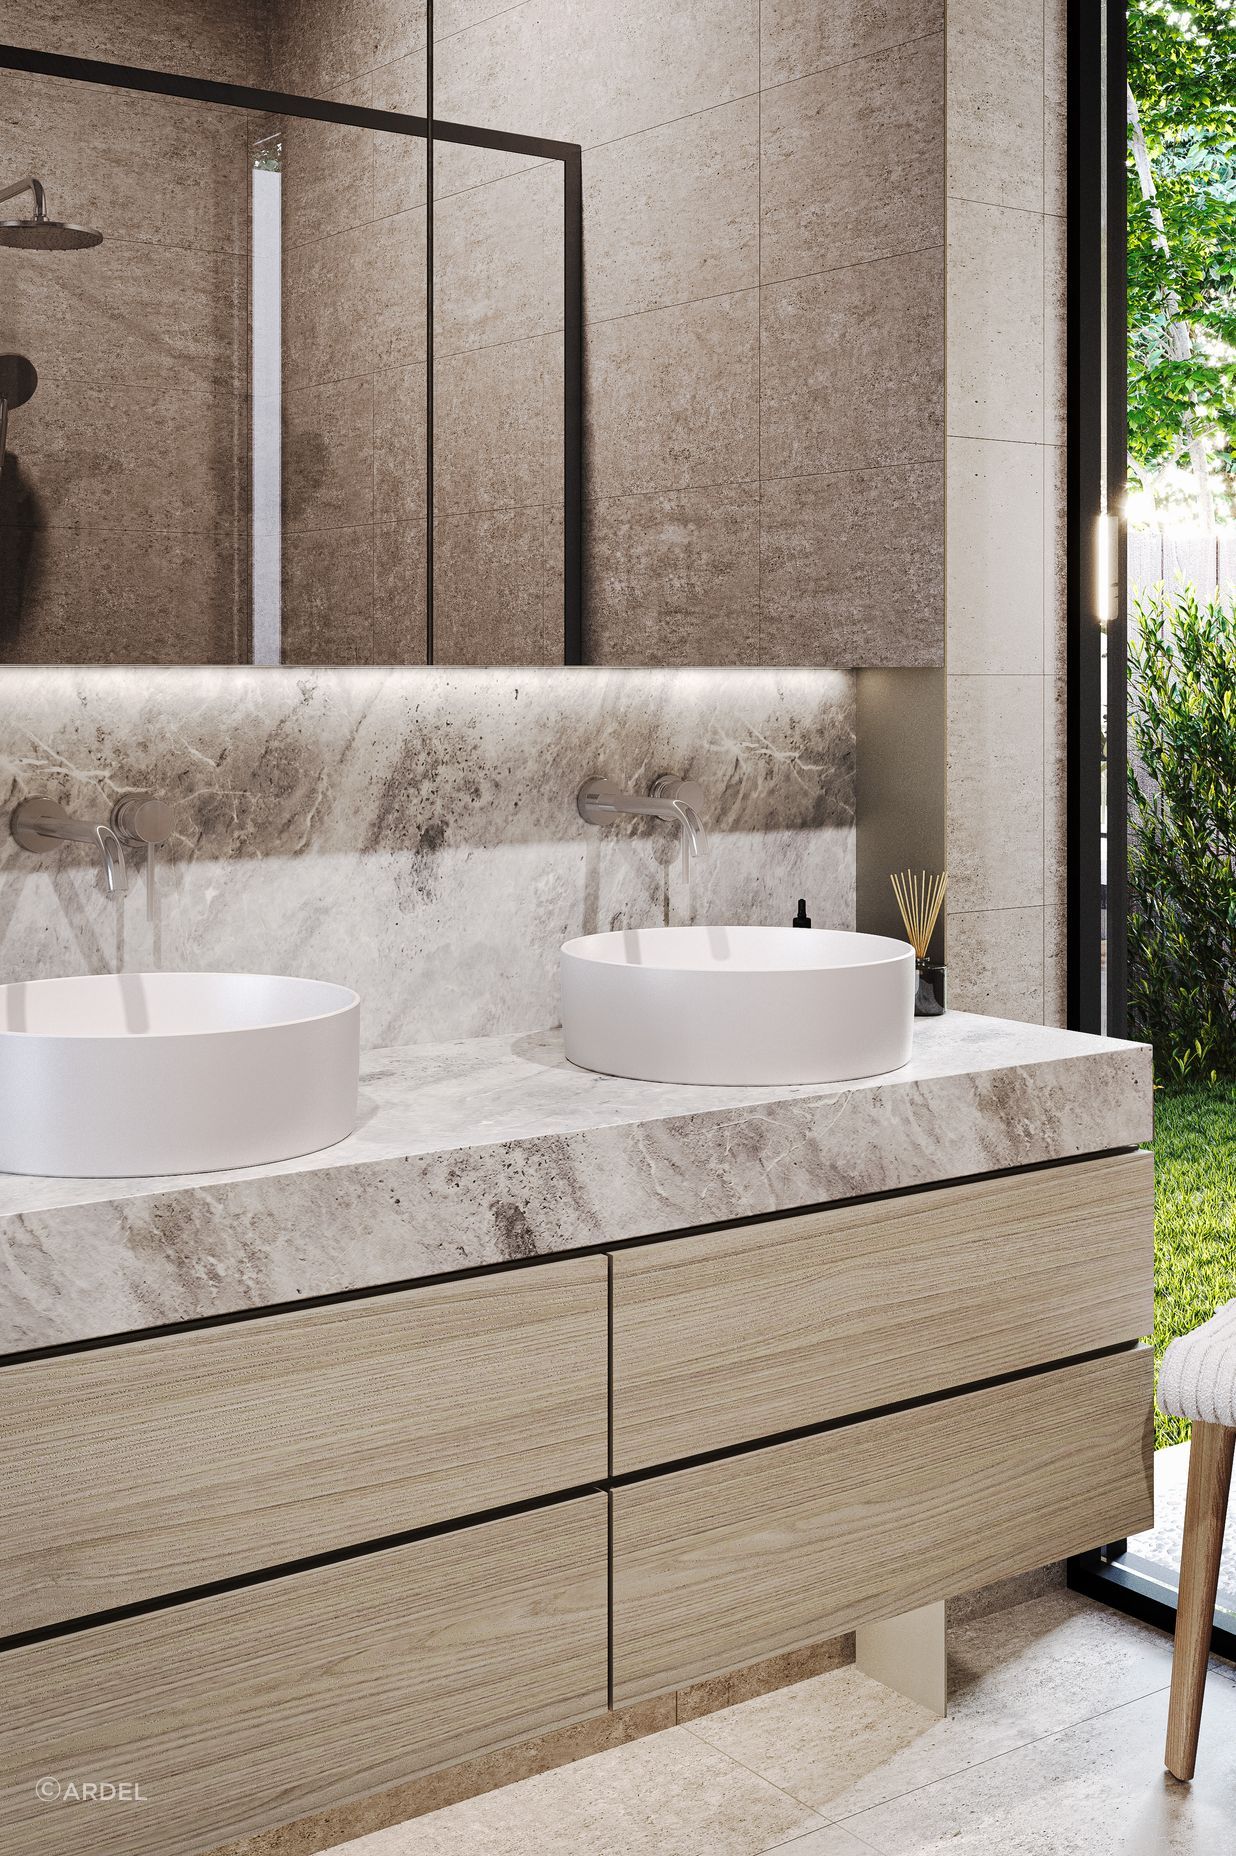  A natural separation between parent and child zones are cleverly established by the placement of each bathroom, with the downstairs master ensuite luxuriously appointed with double vanities, dual showers and marble benchtops.